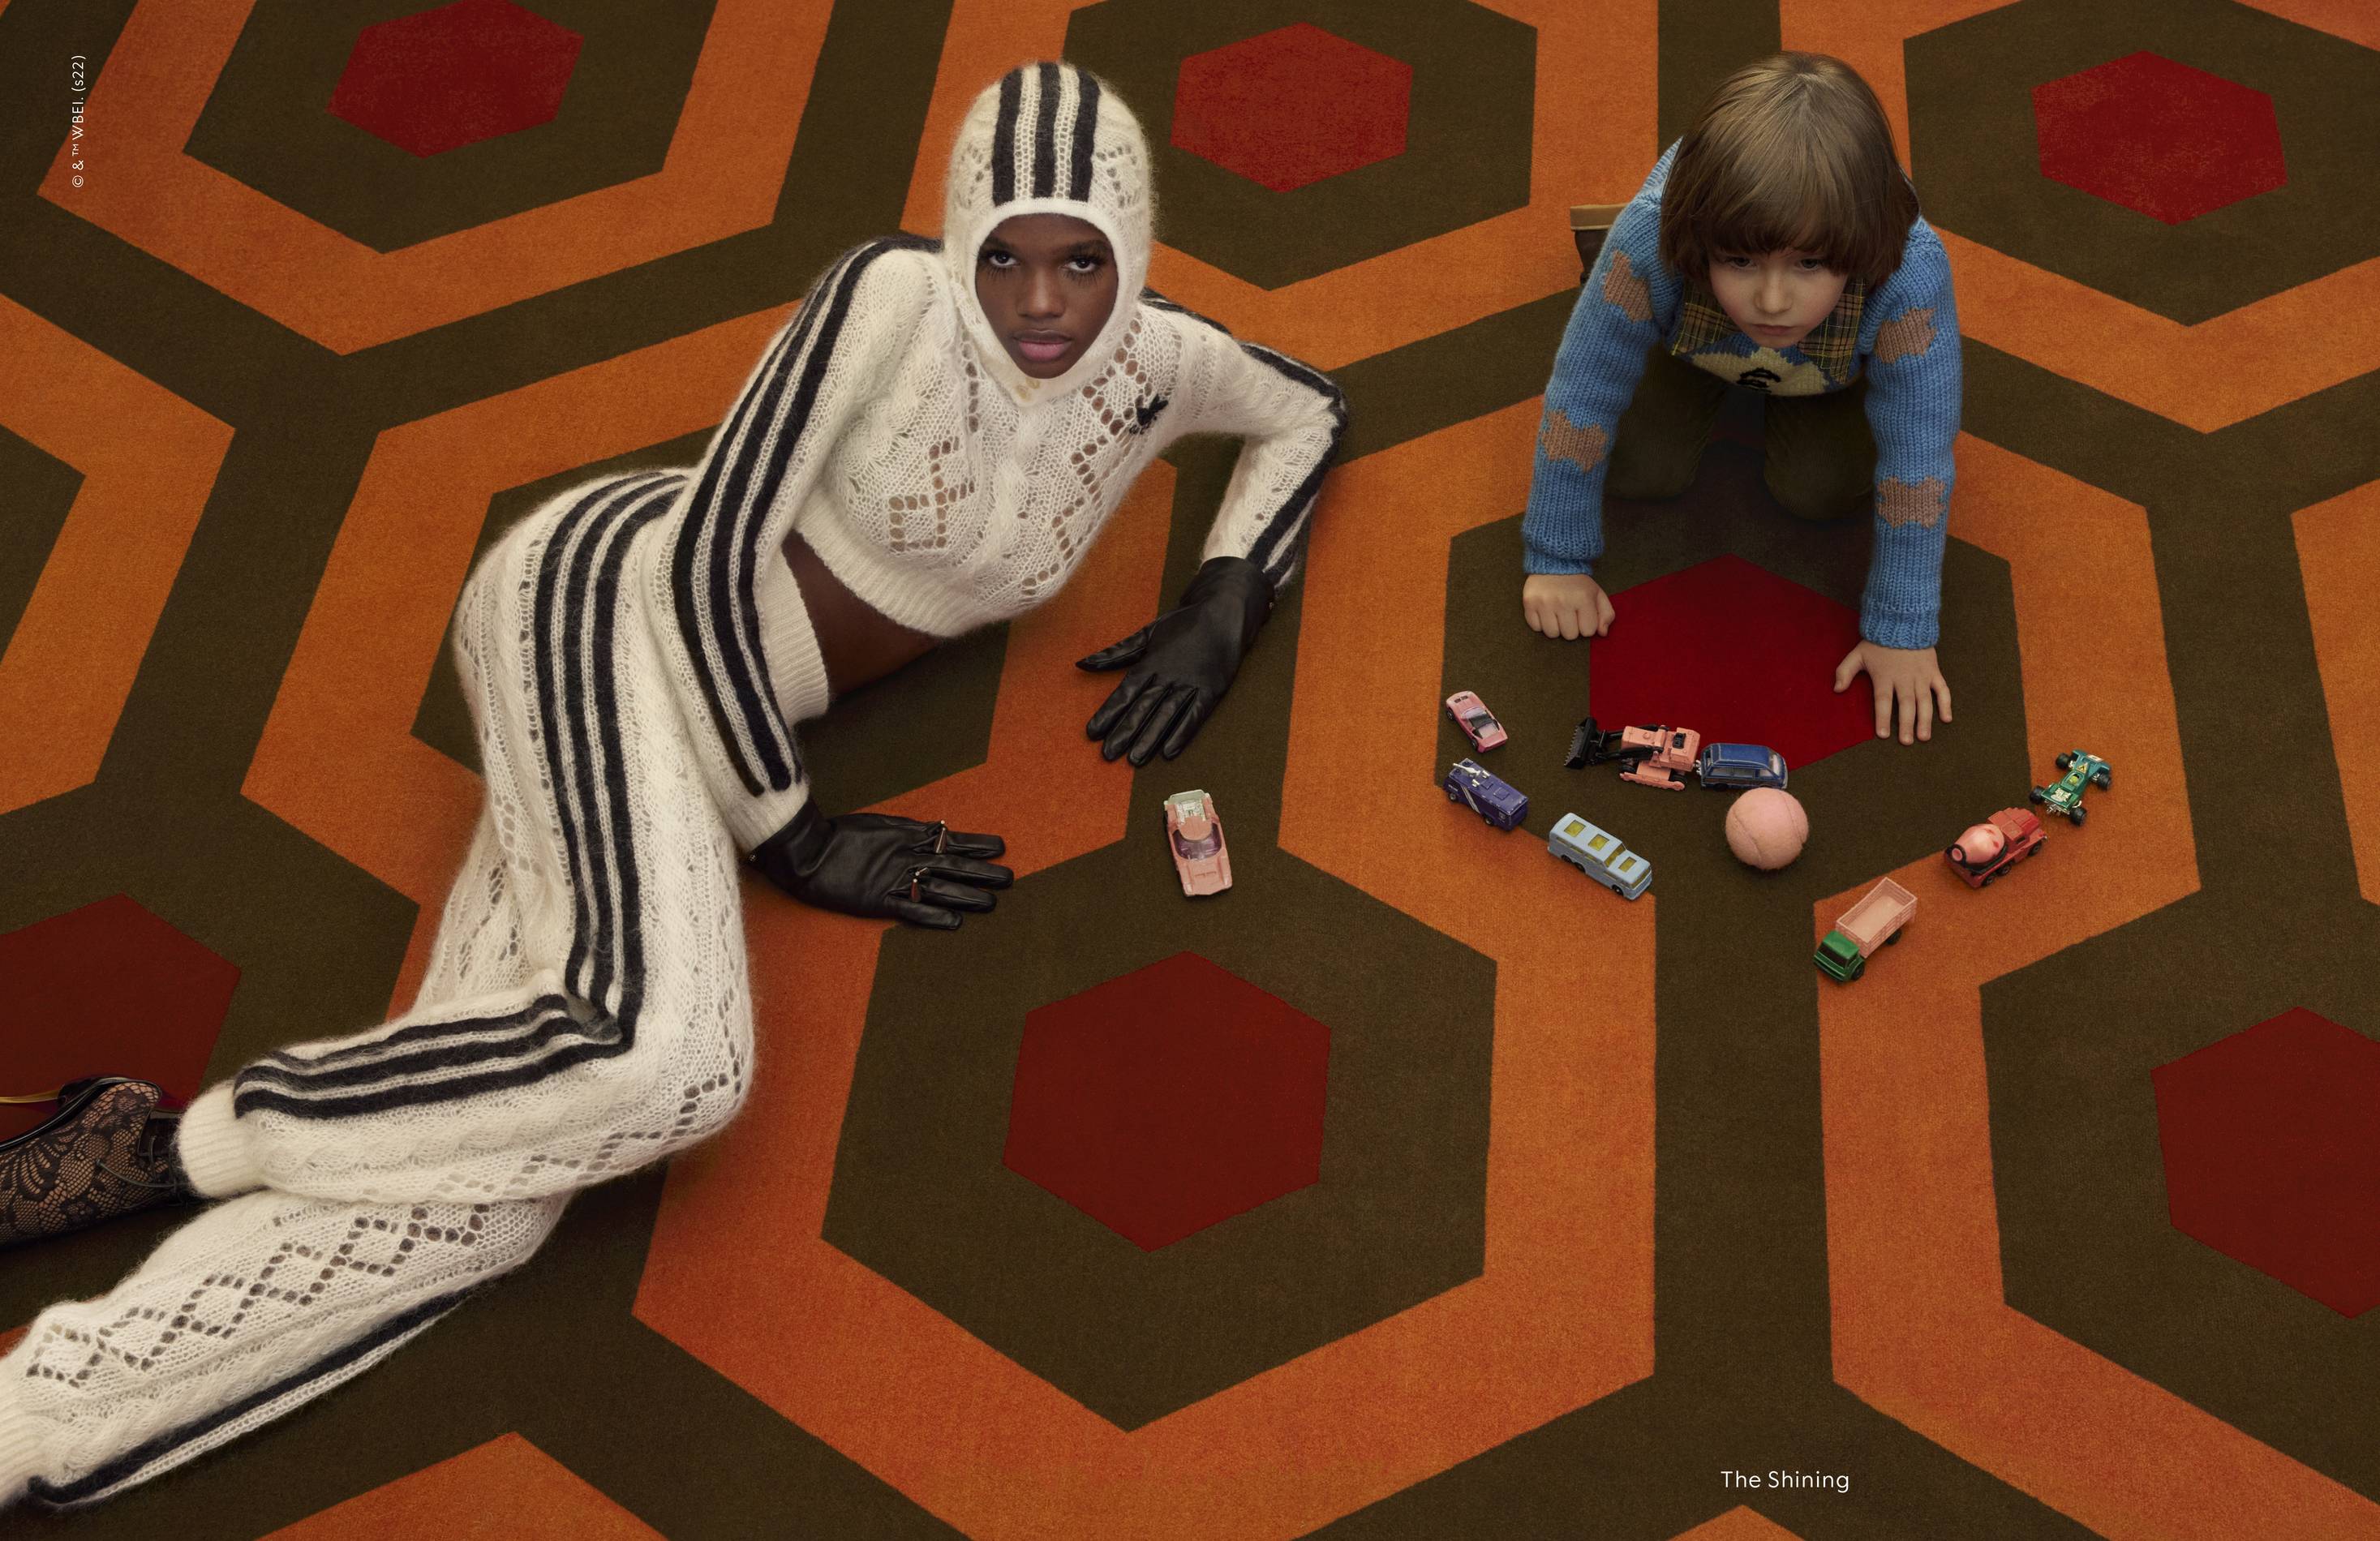 gucci x adidas exquisite campaign image still; the shining